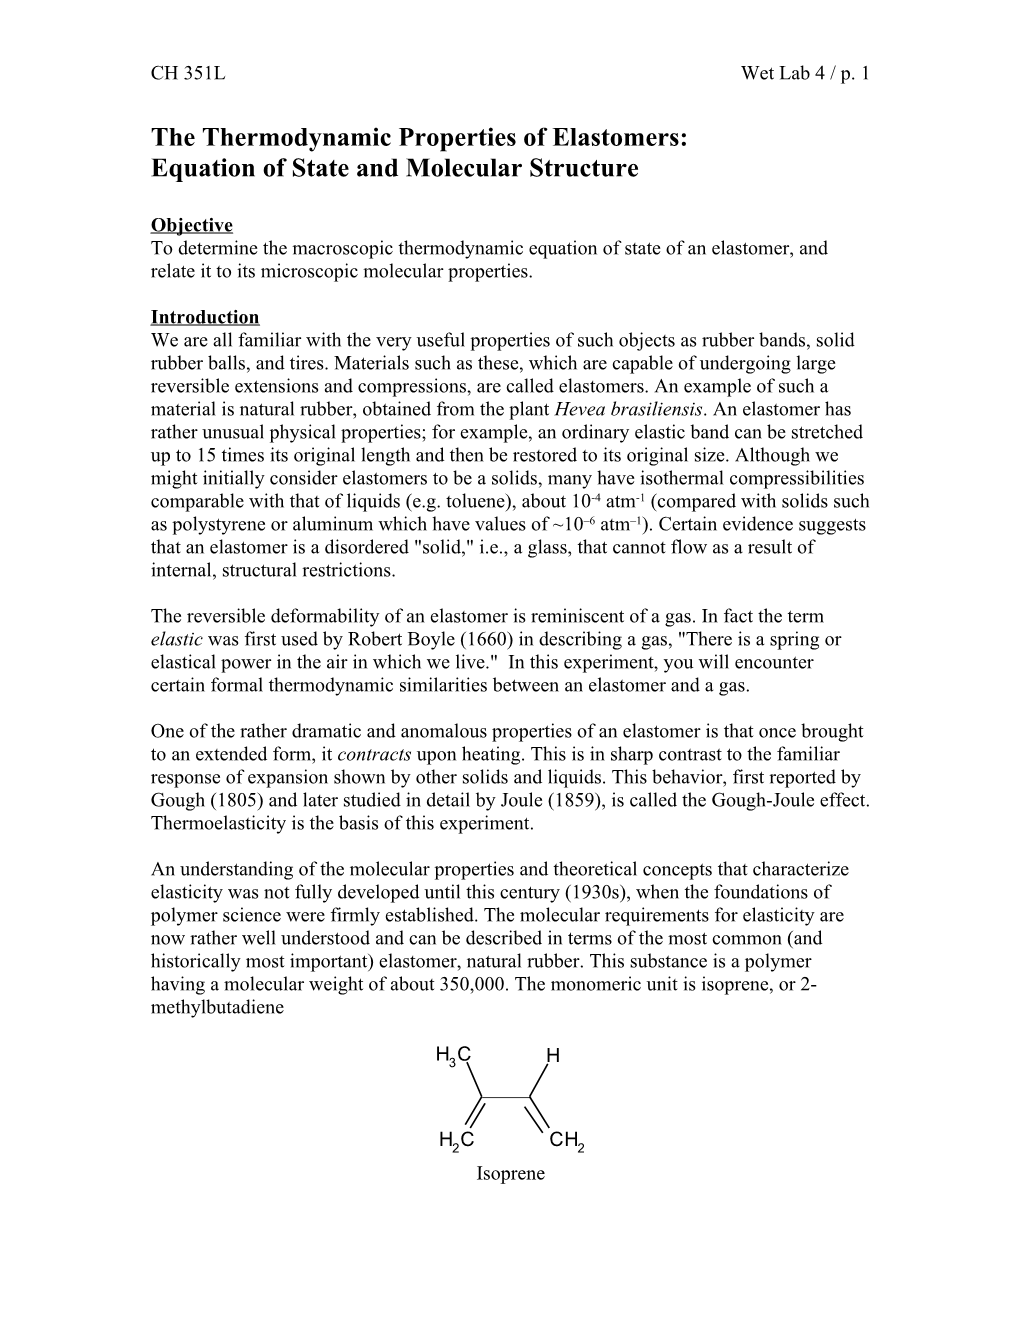 The Thermodynamic Properties of Elastomers